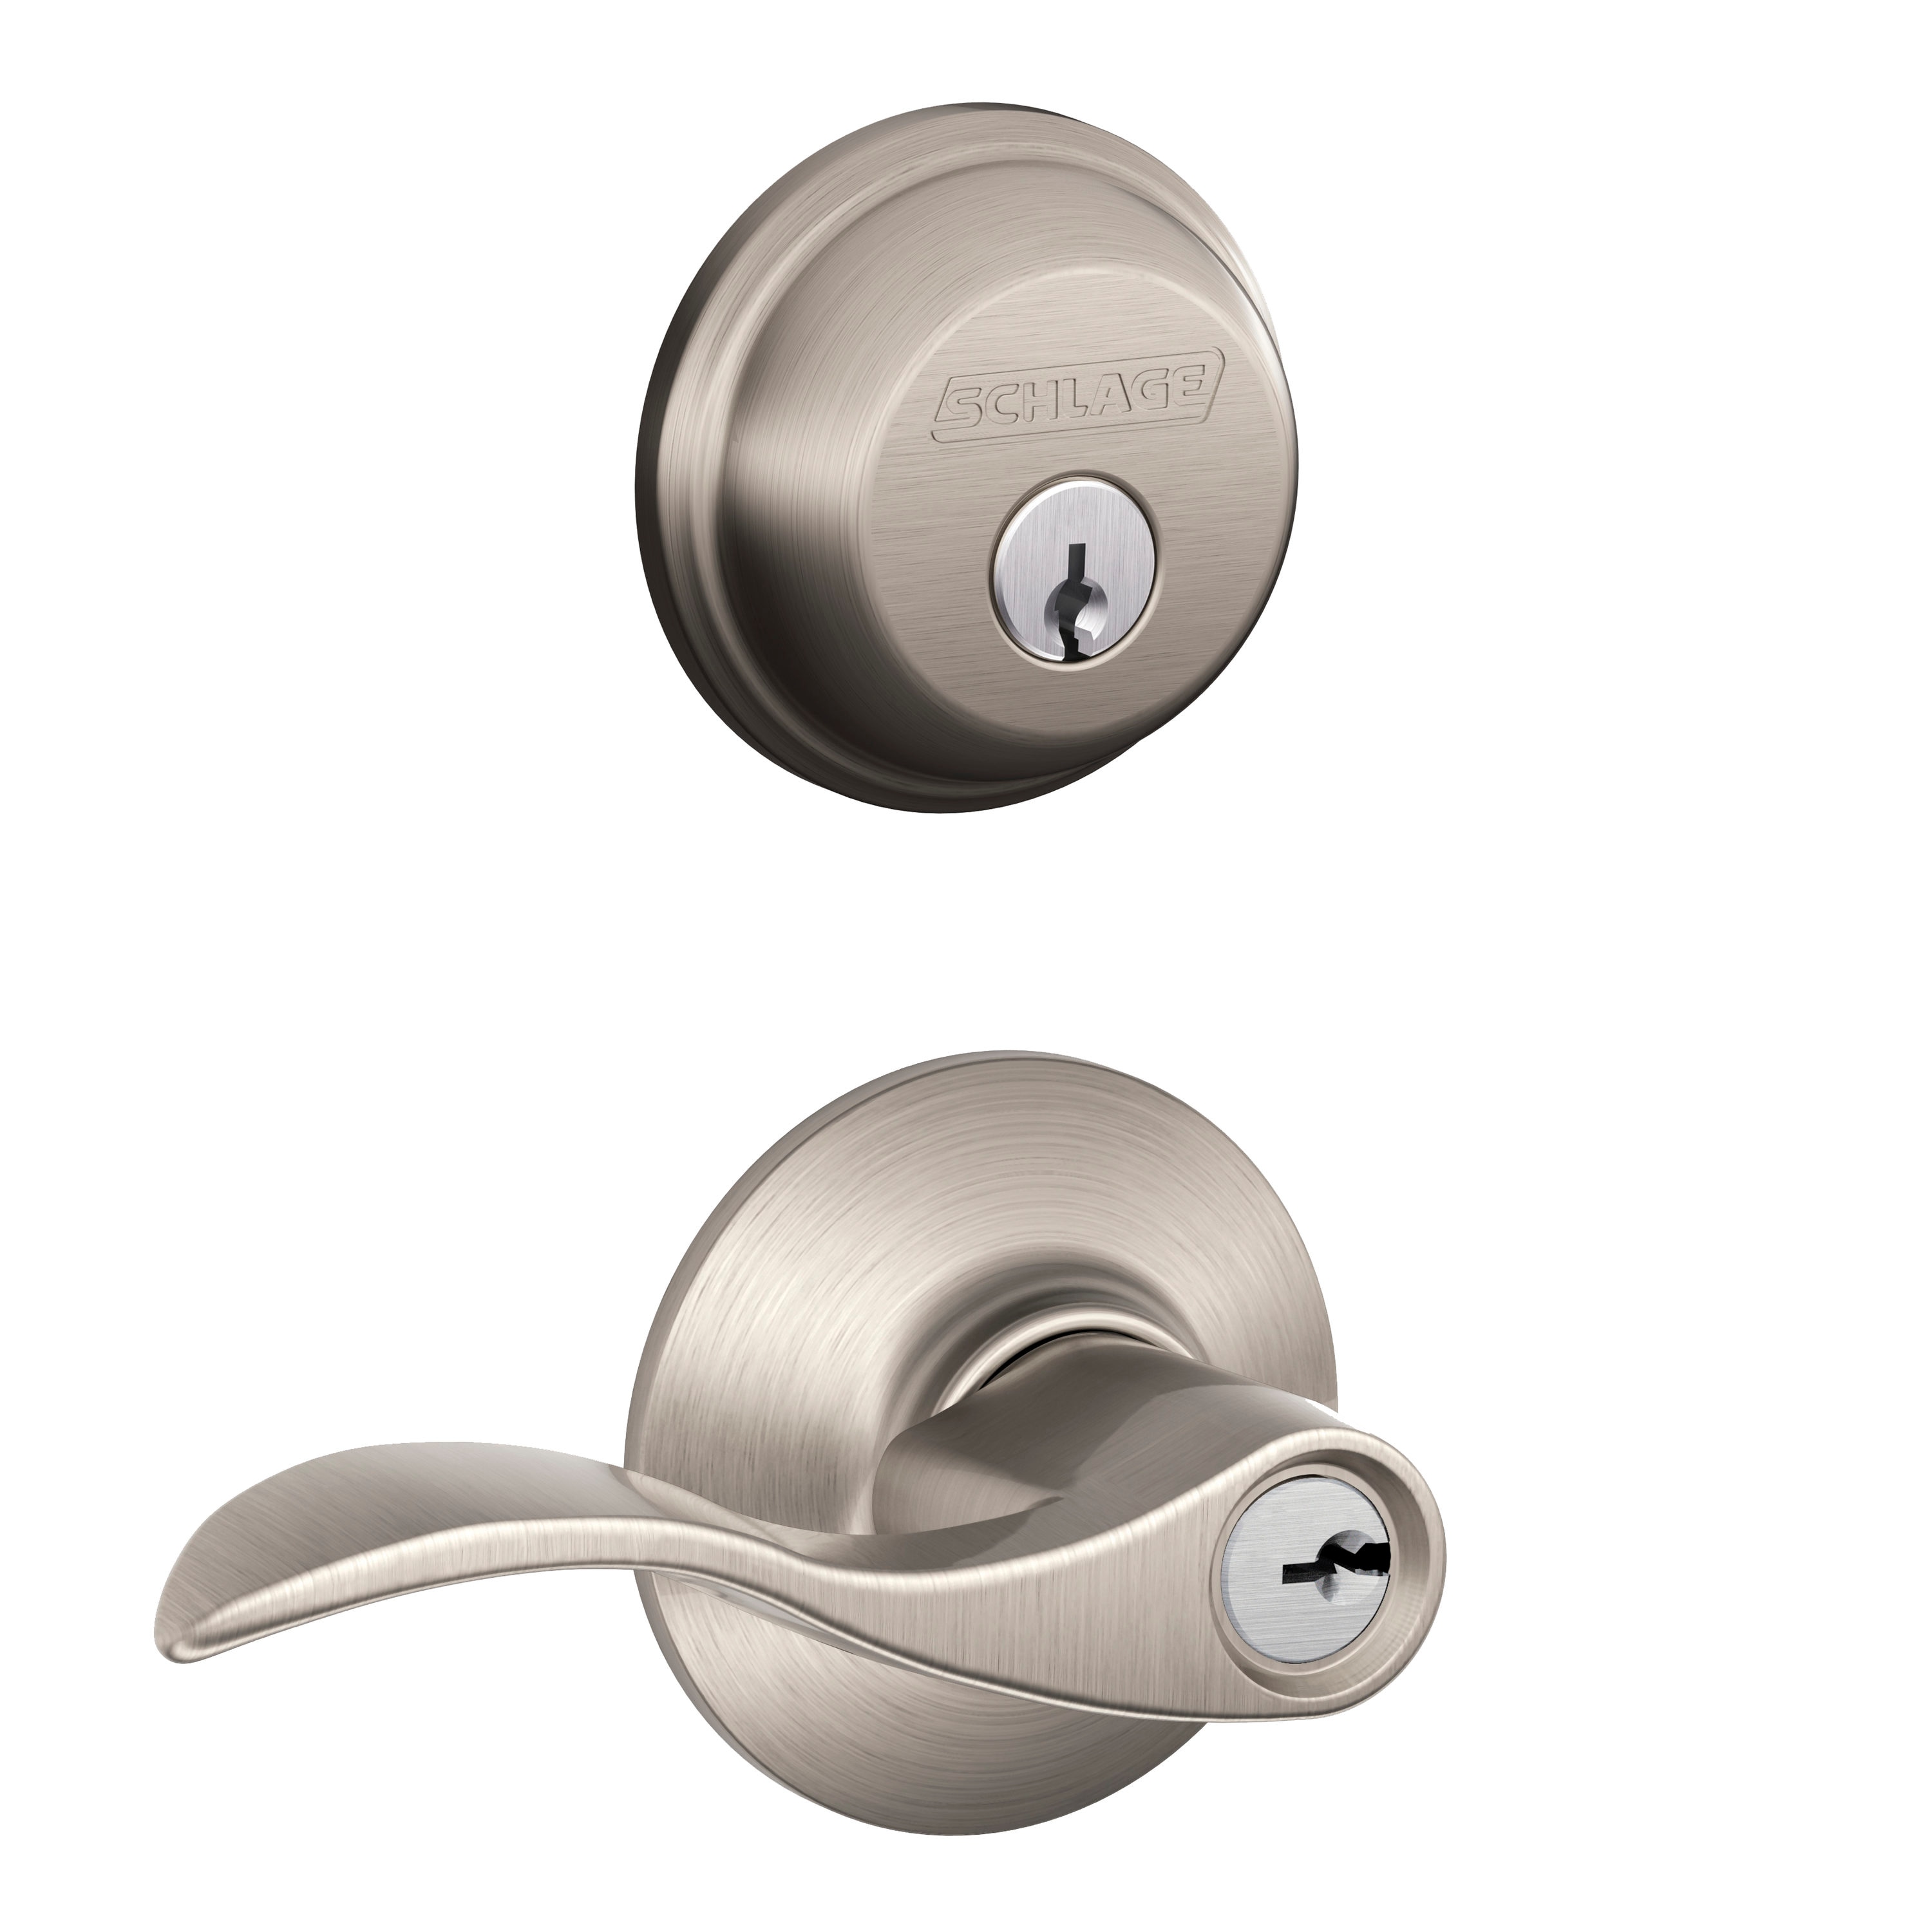 Shop Schlage Accent Satin Nickel Collection at Lowes.com